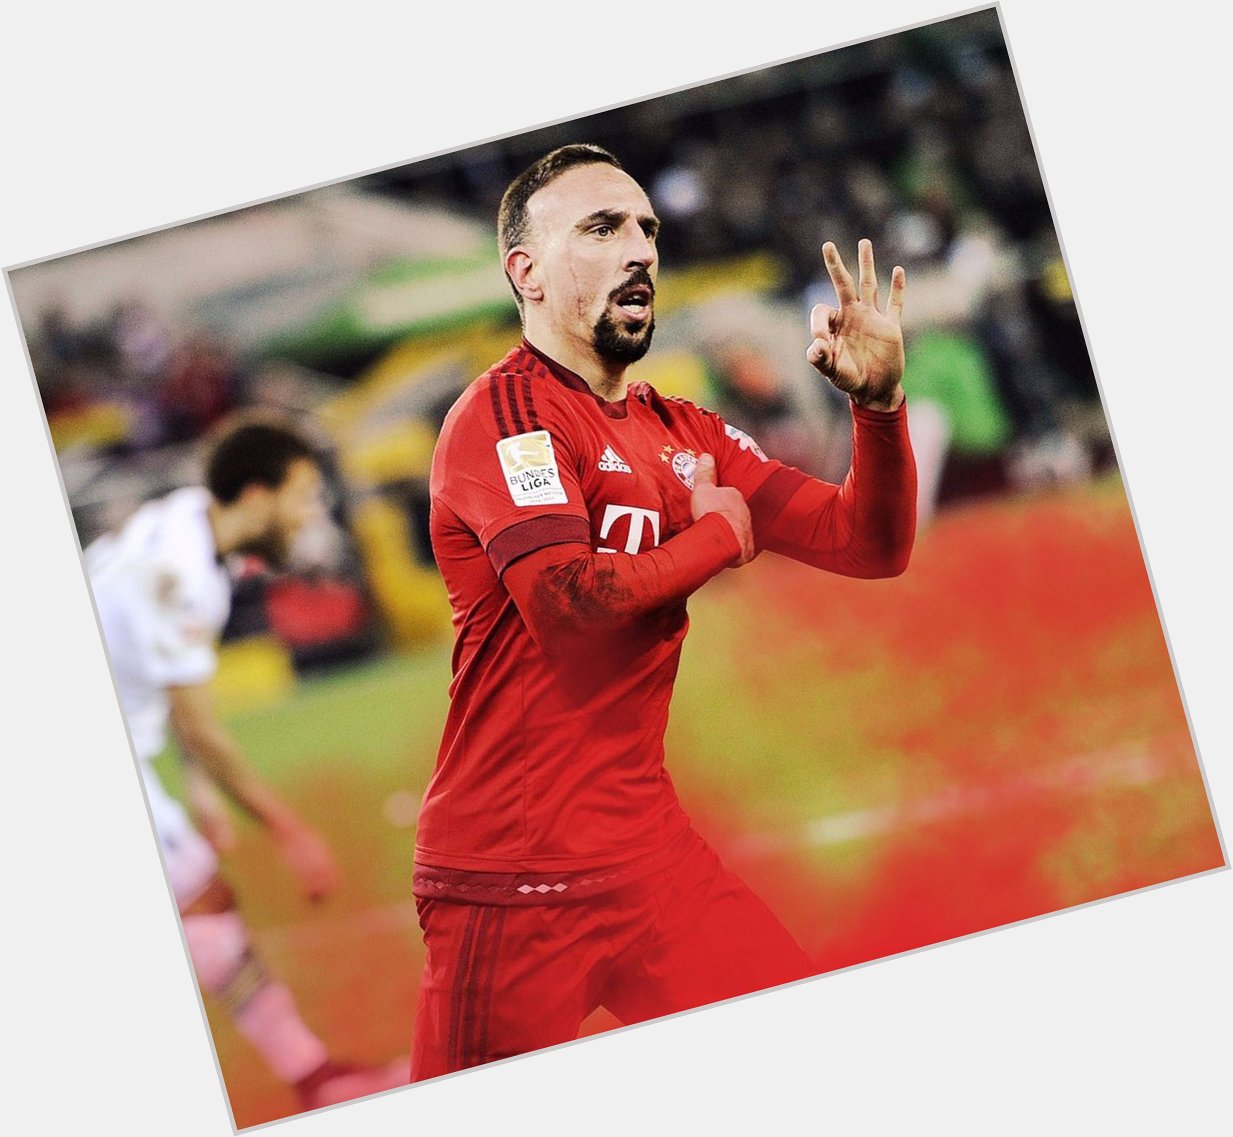 Happy 34th Birthday to one of the finest wingers of our generation .. Franck Ribery. 